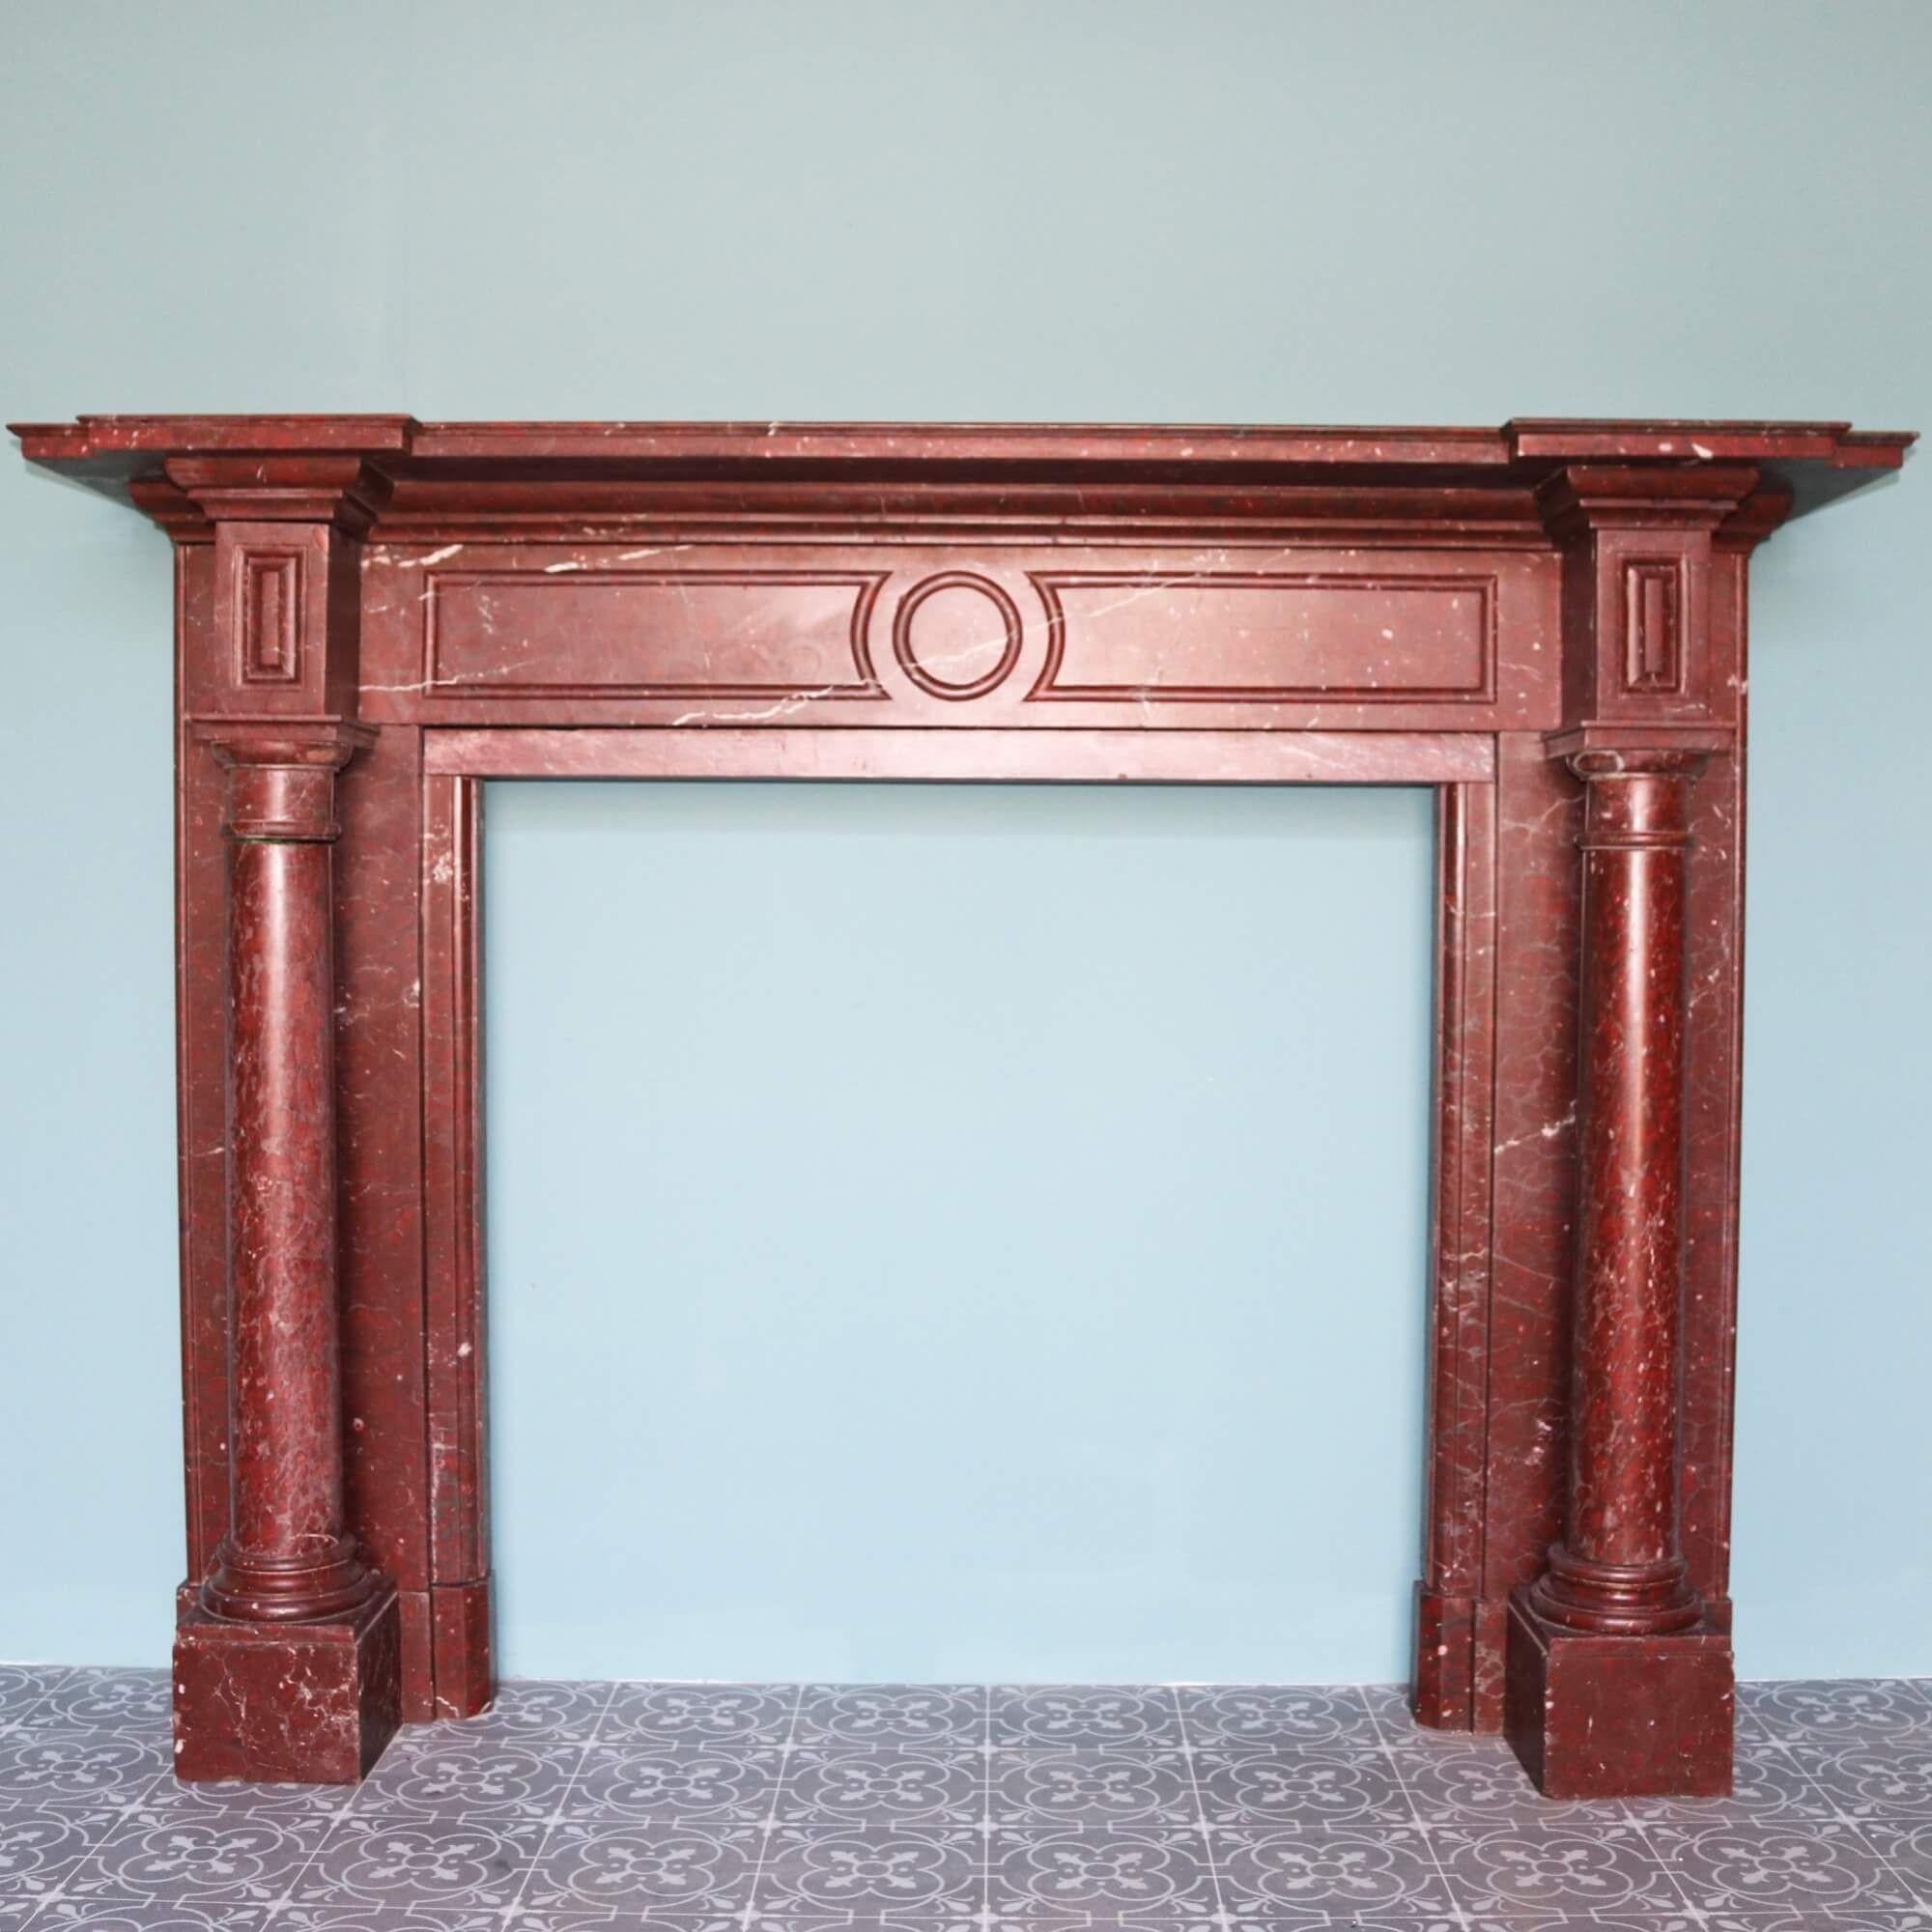 This spectacular, large scale French fireplace makes an impressive focal point in a large room with its prestigious design and rich Rouge Griotte marble craftsmanship. Originating from France, it is more than 150 years old and dates from the late